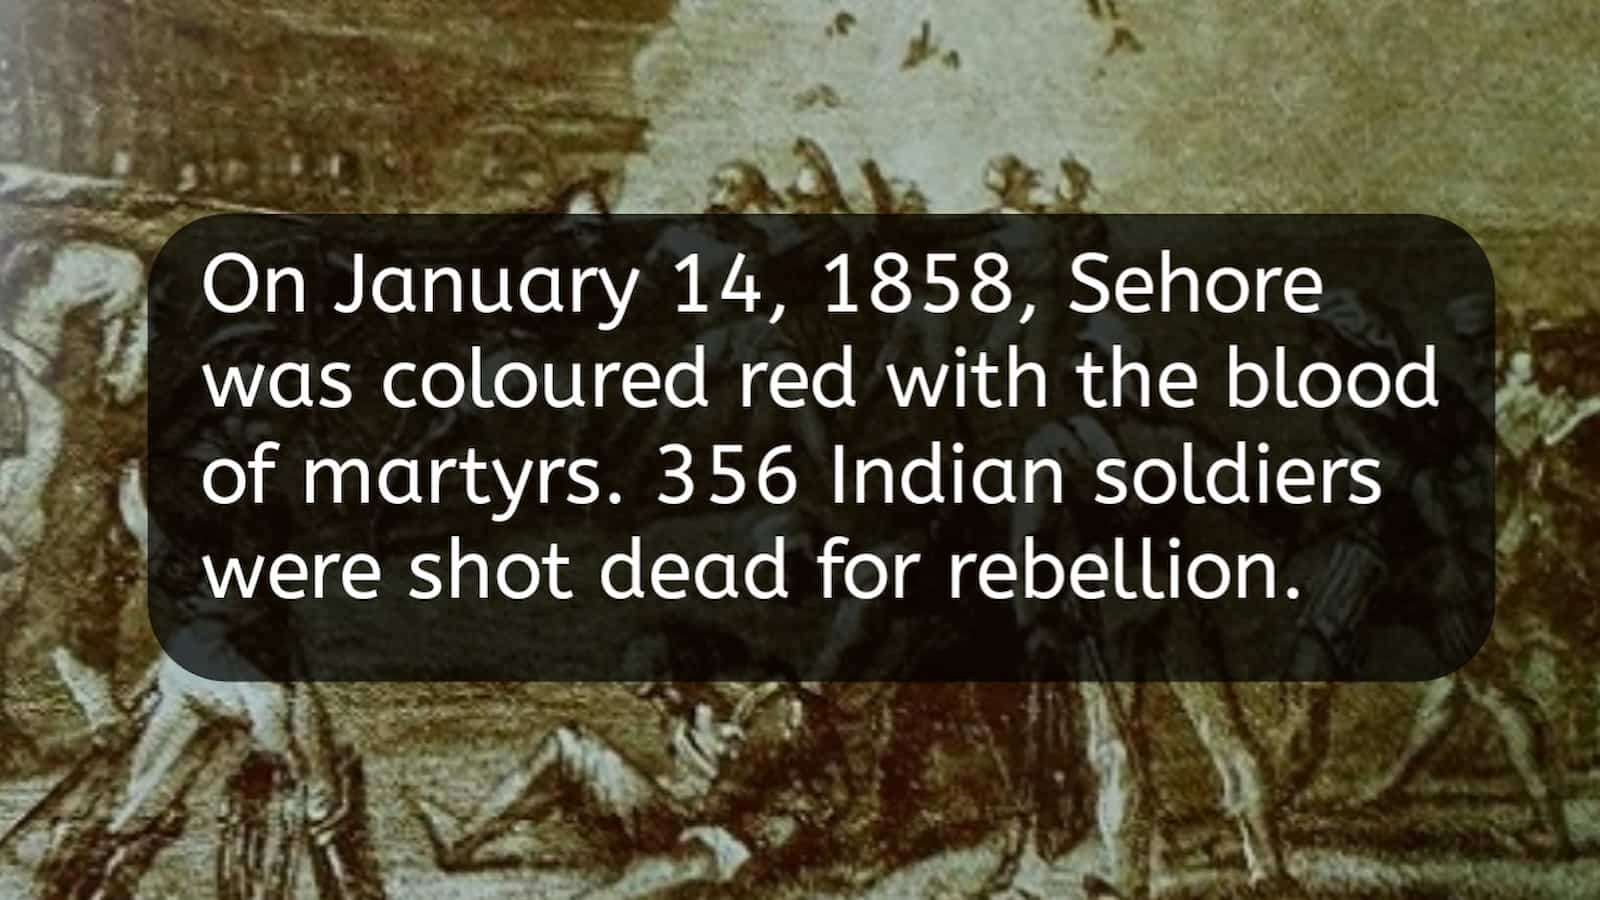 A cover image: On January 14, 1858, Sehore was coloured with the blood of martyrs, 356 Indian soldiers were shot dead for rebellion